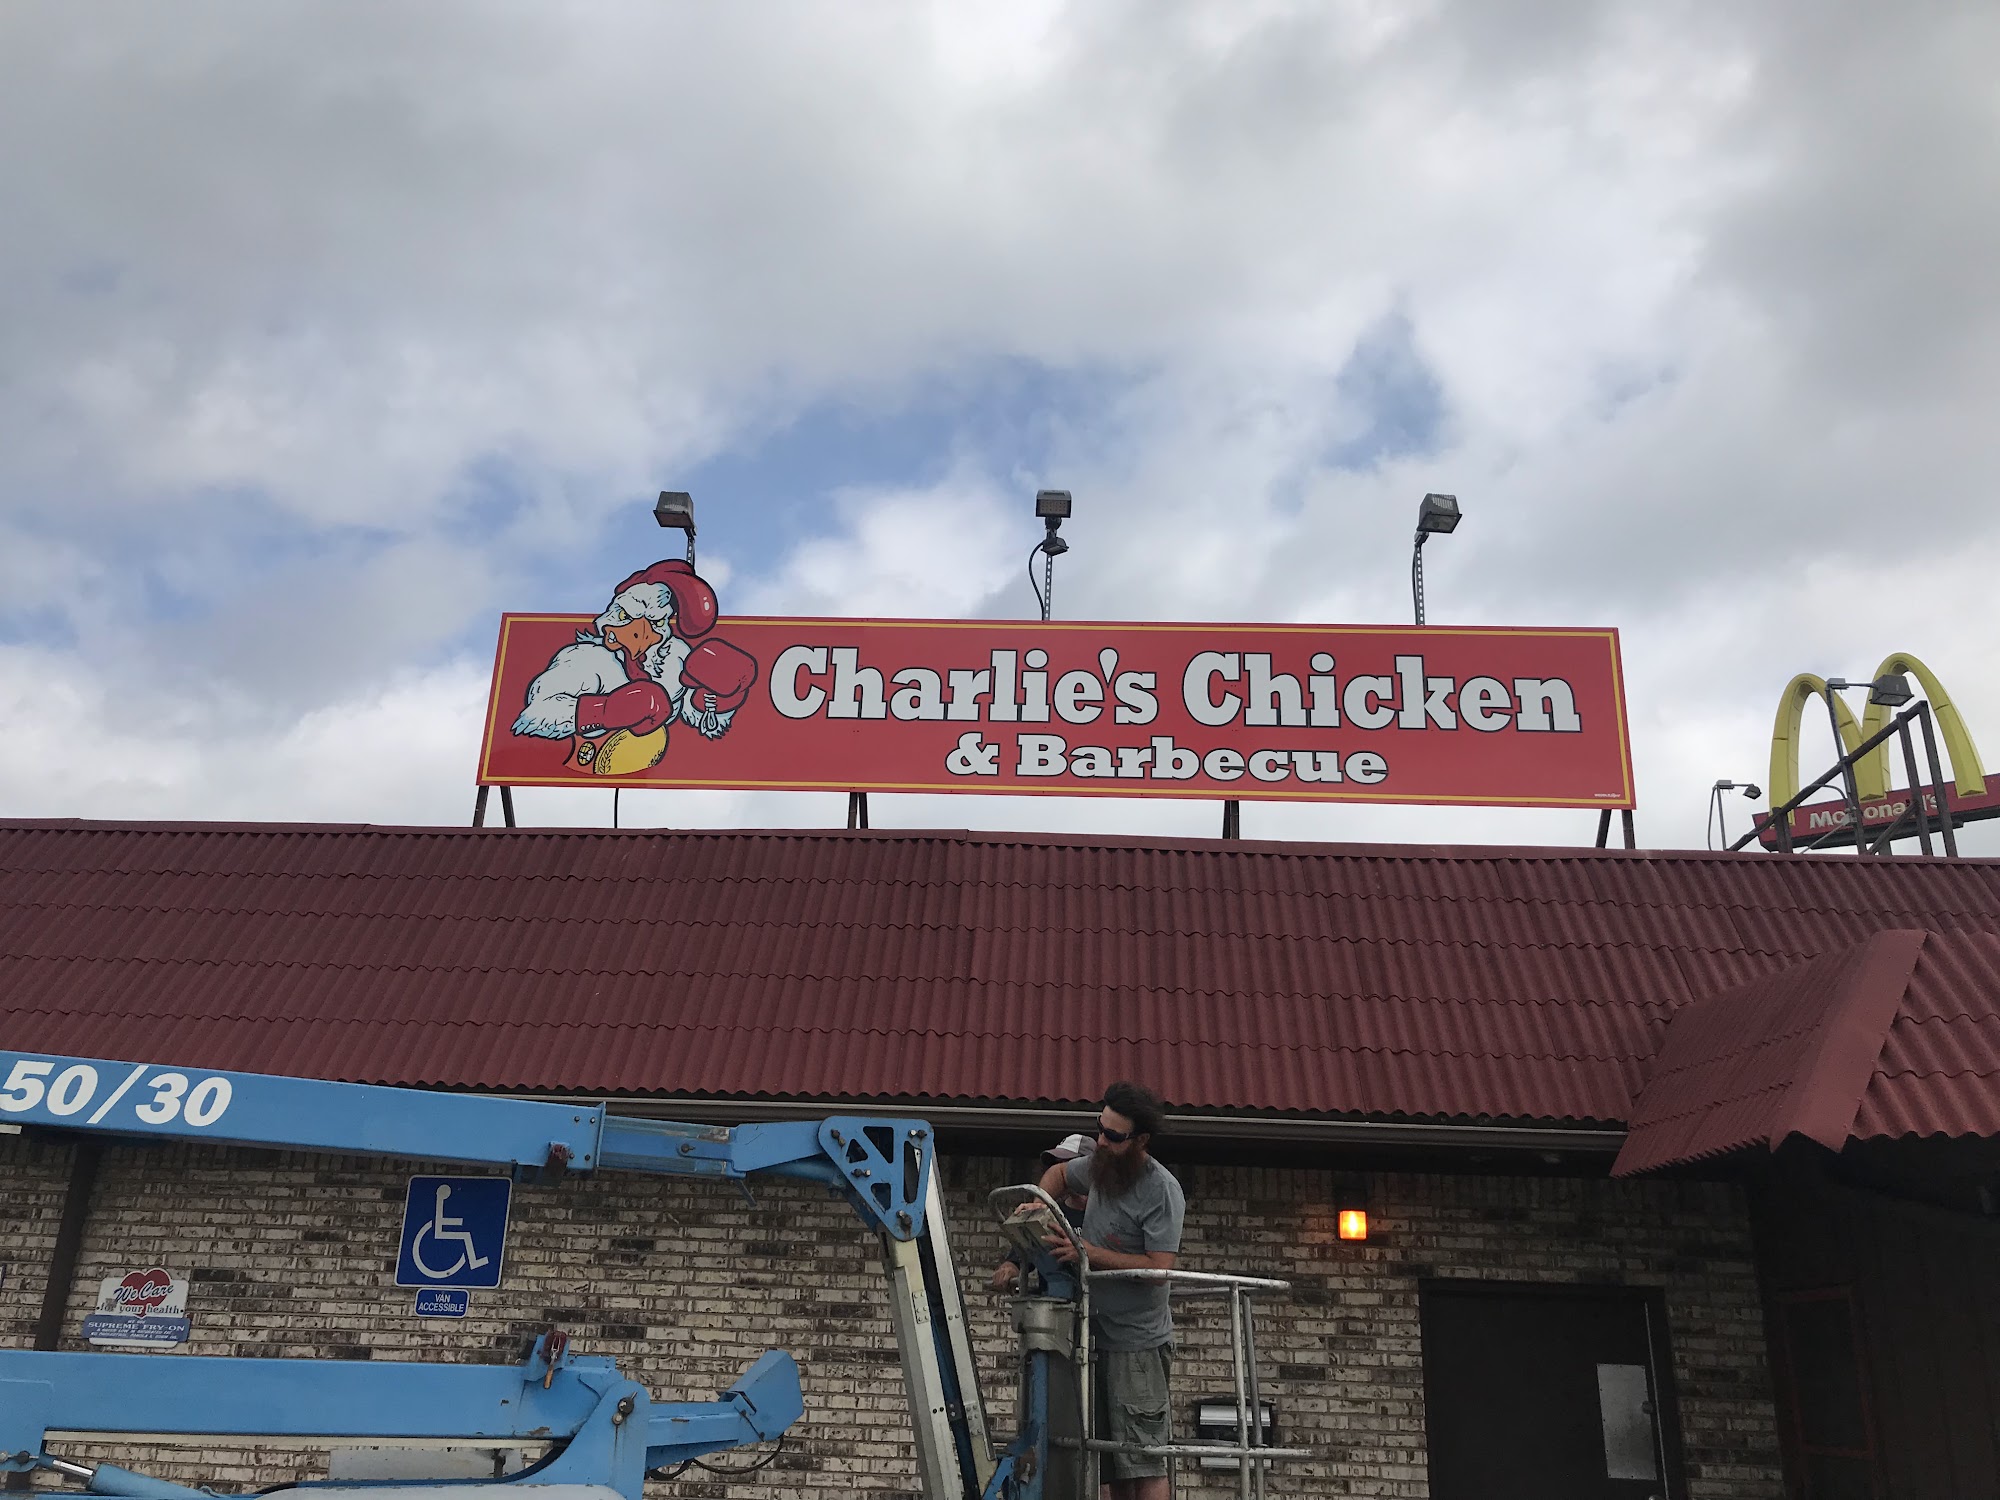 Charlie's Chicken & Barbecue